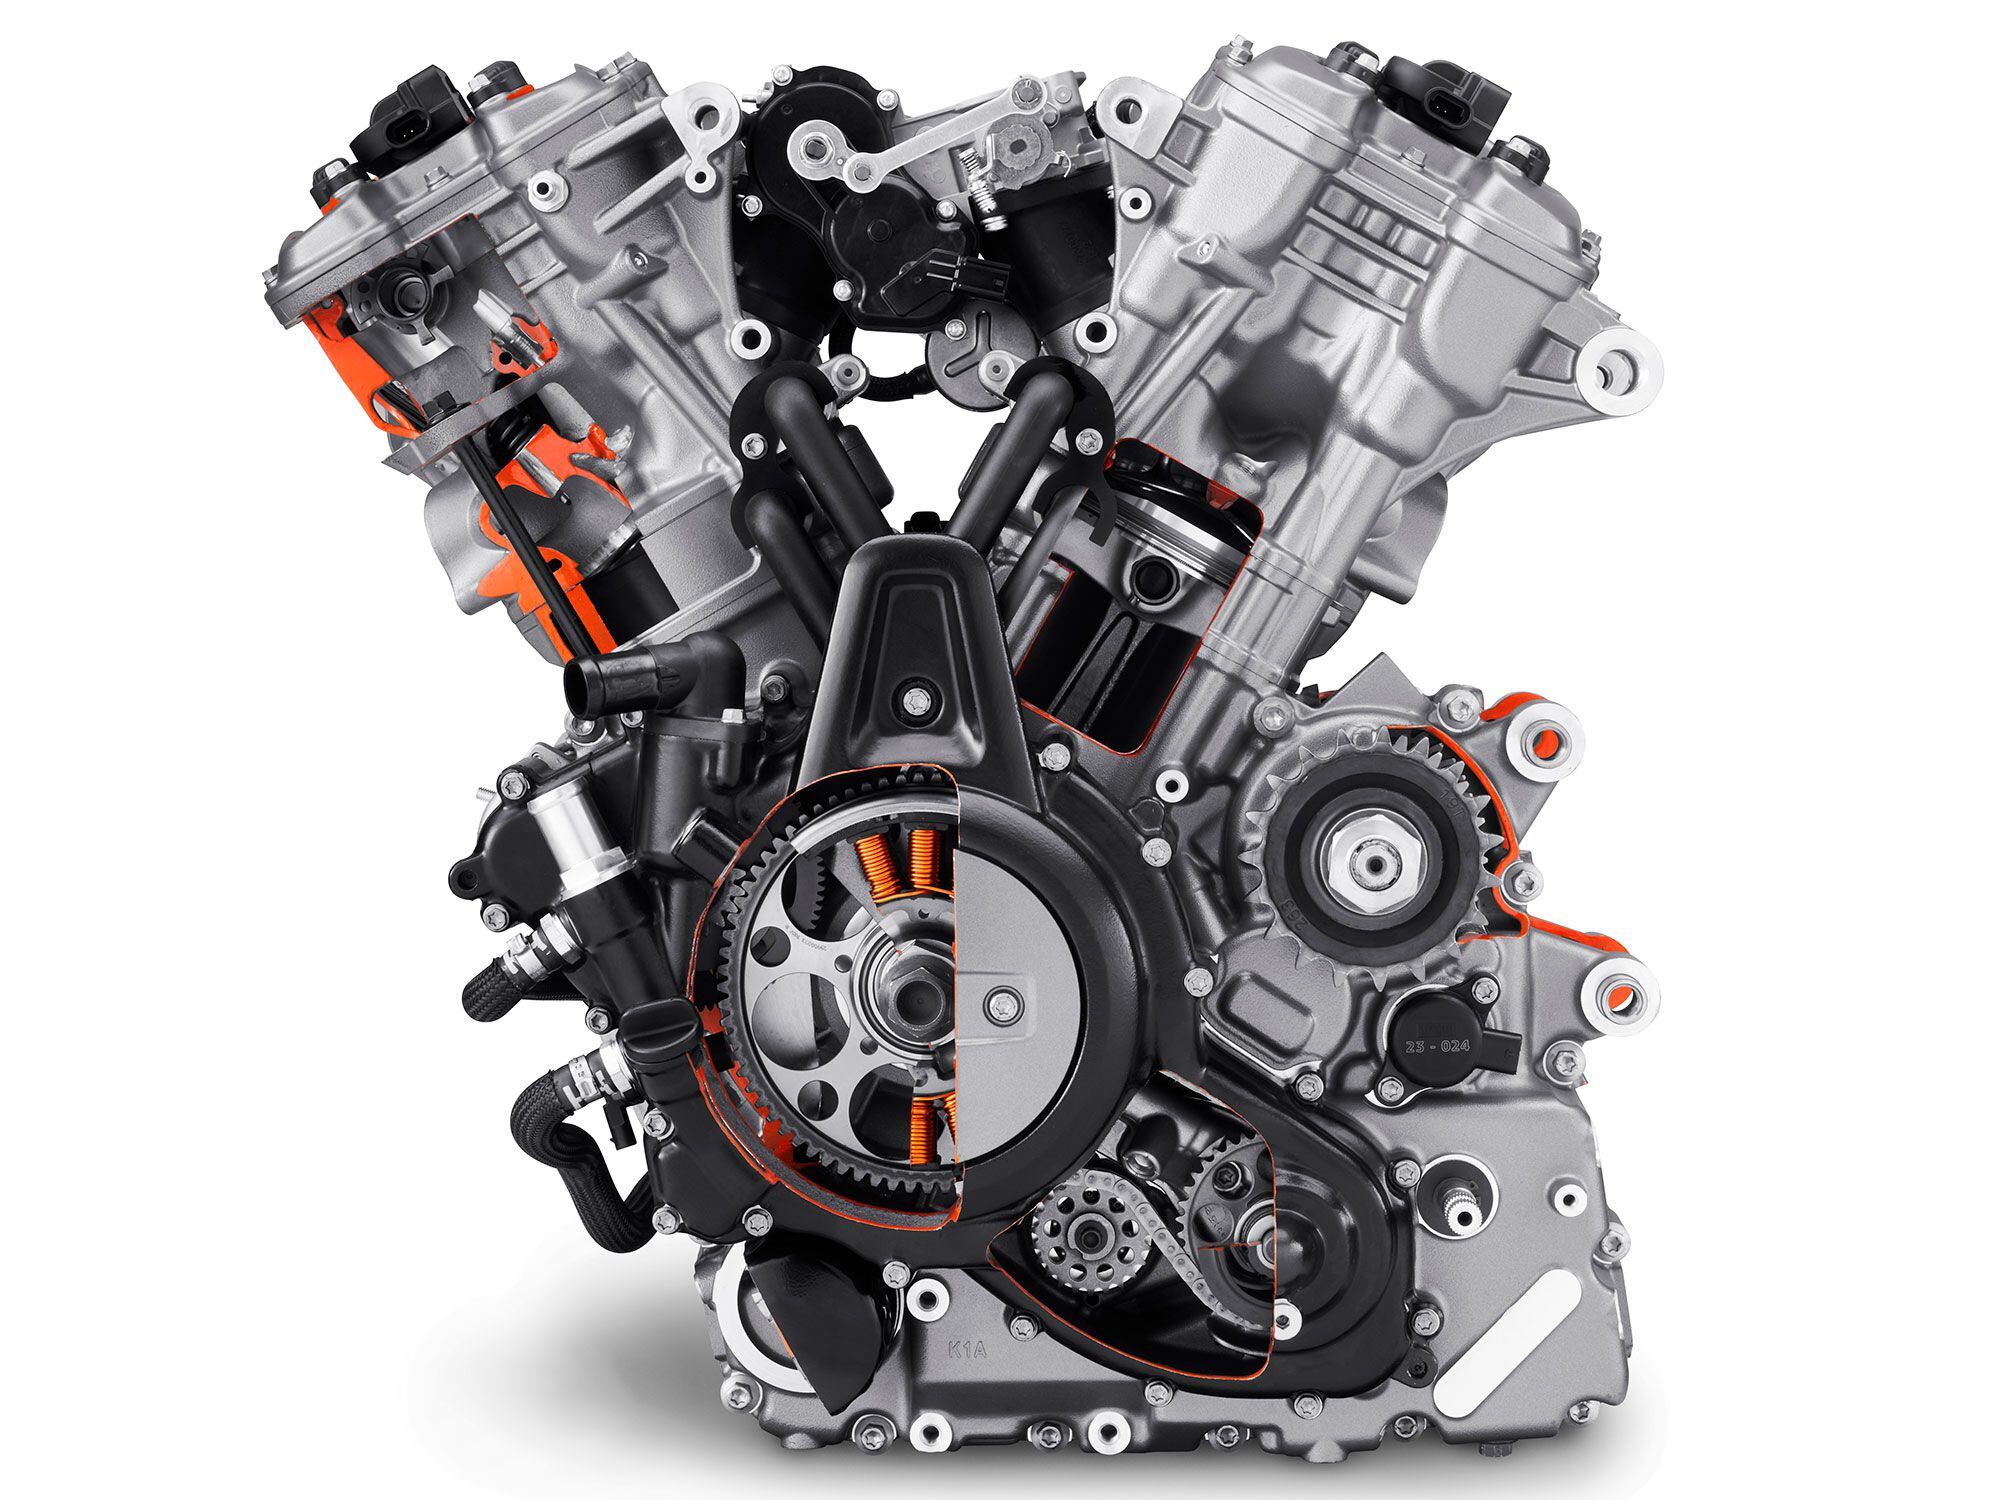 The 1252cc Revolution Max engine produces a claimed 94 pound-feet of peak torque and 150 horsepower.